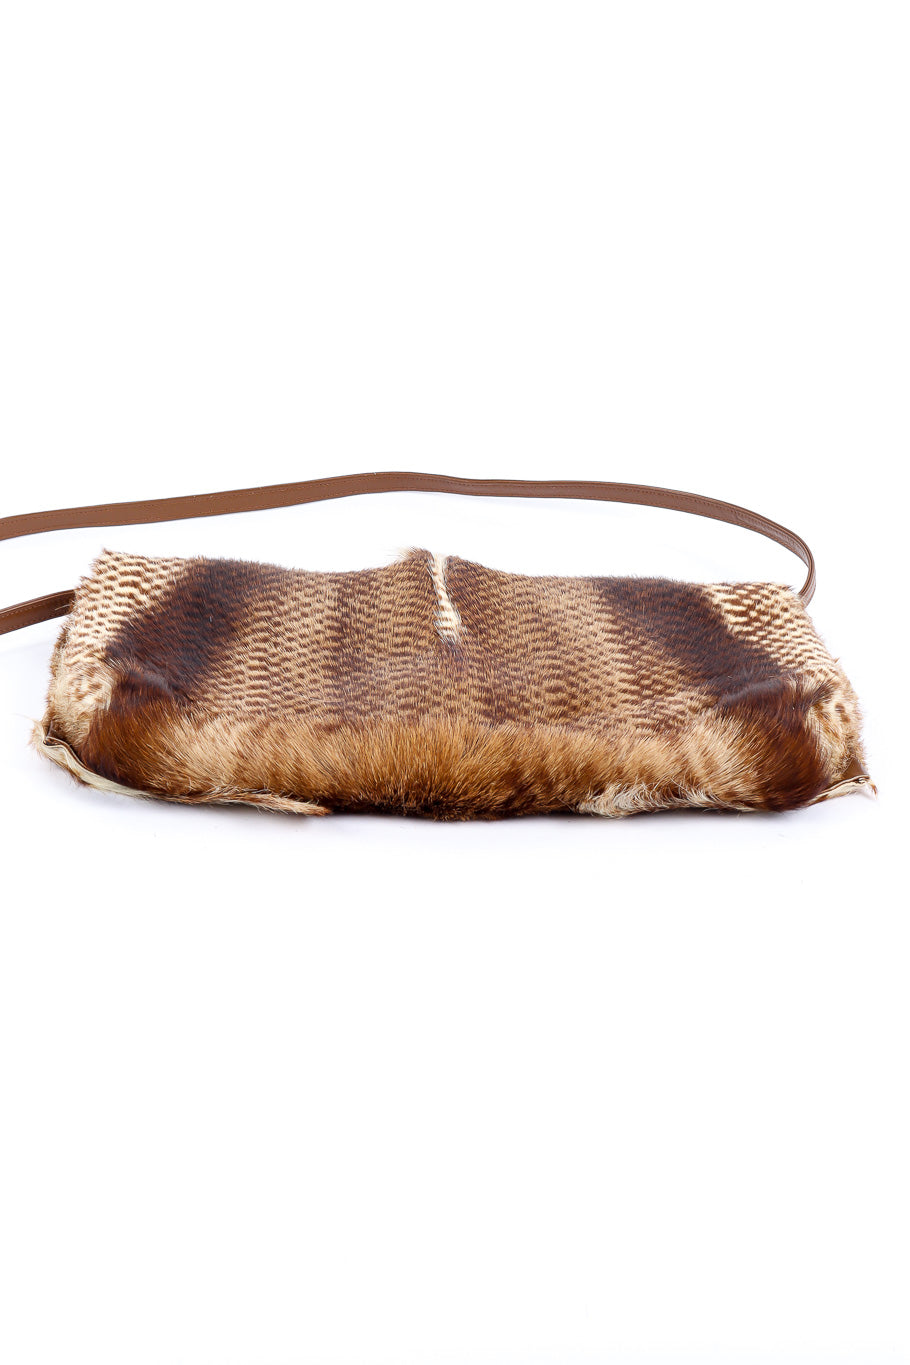 Leather and fur bag by Halston flat lay bottom @recessla